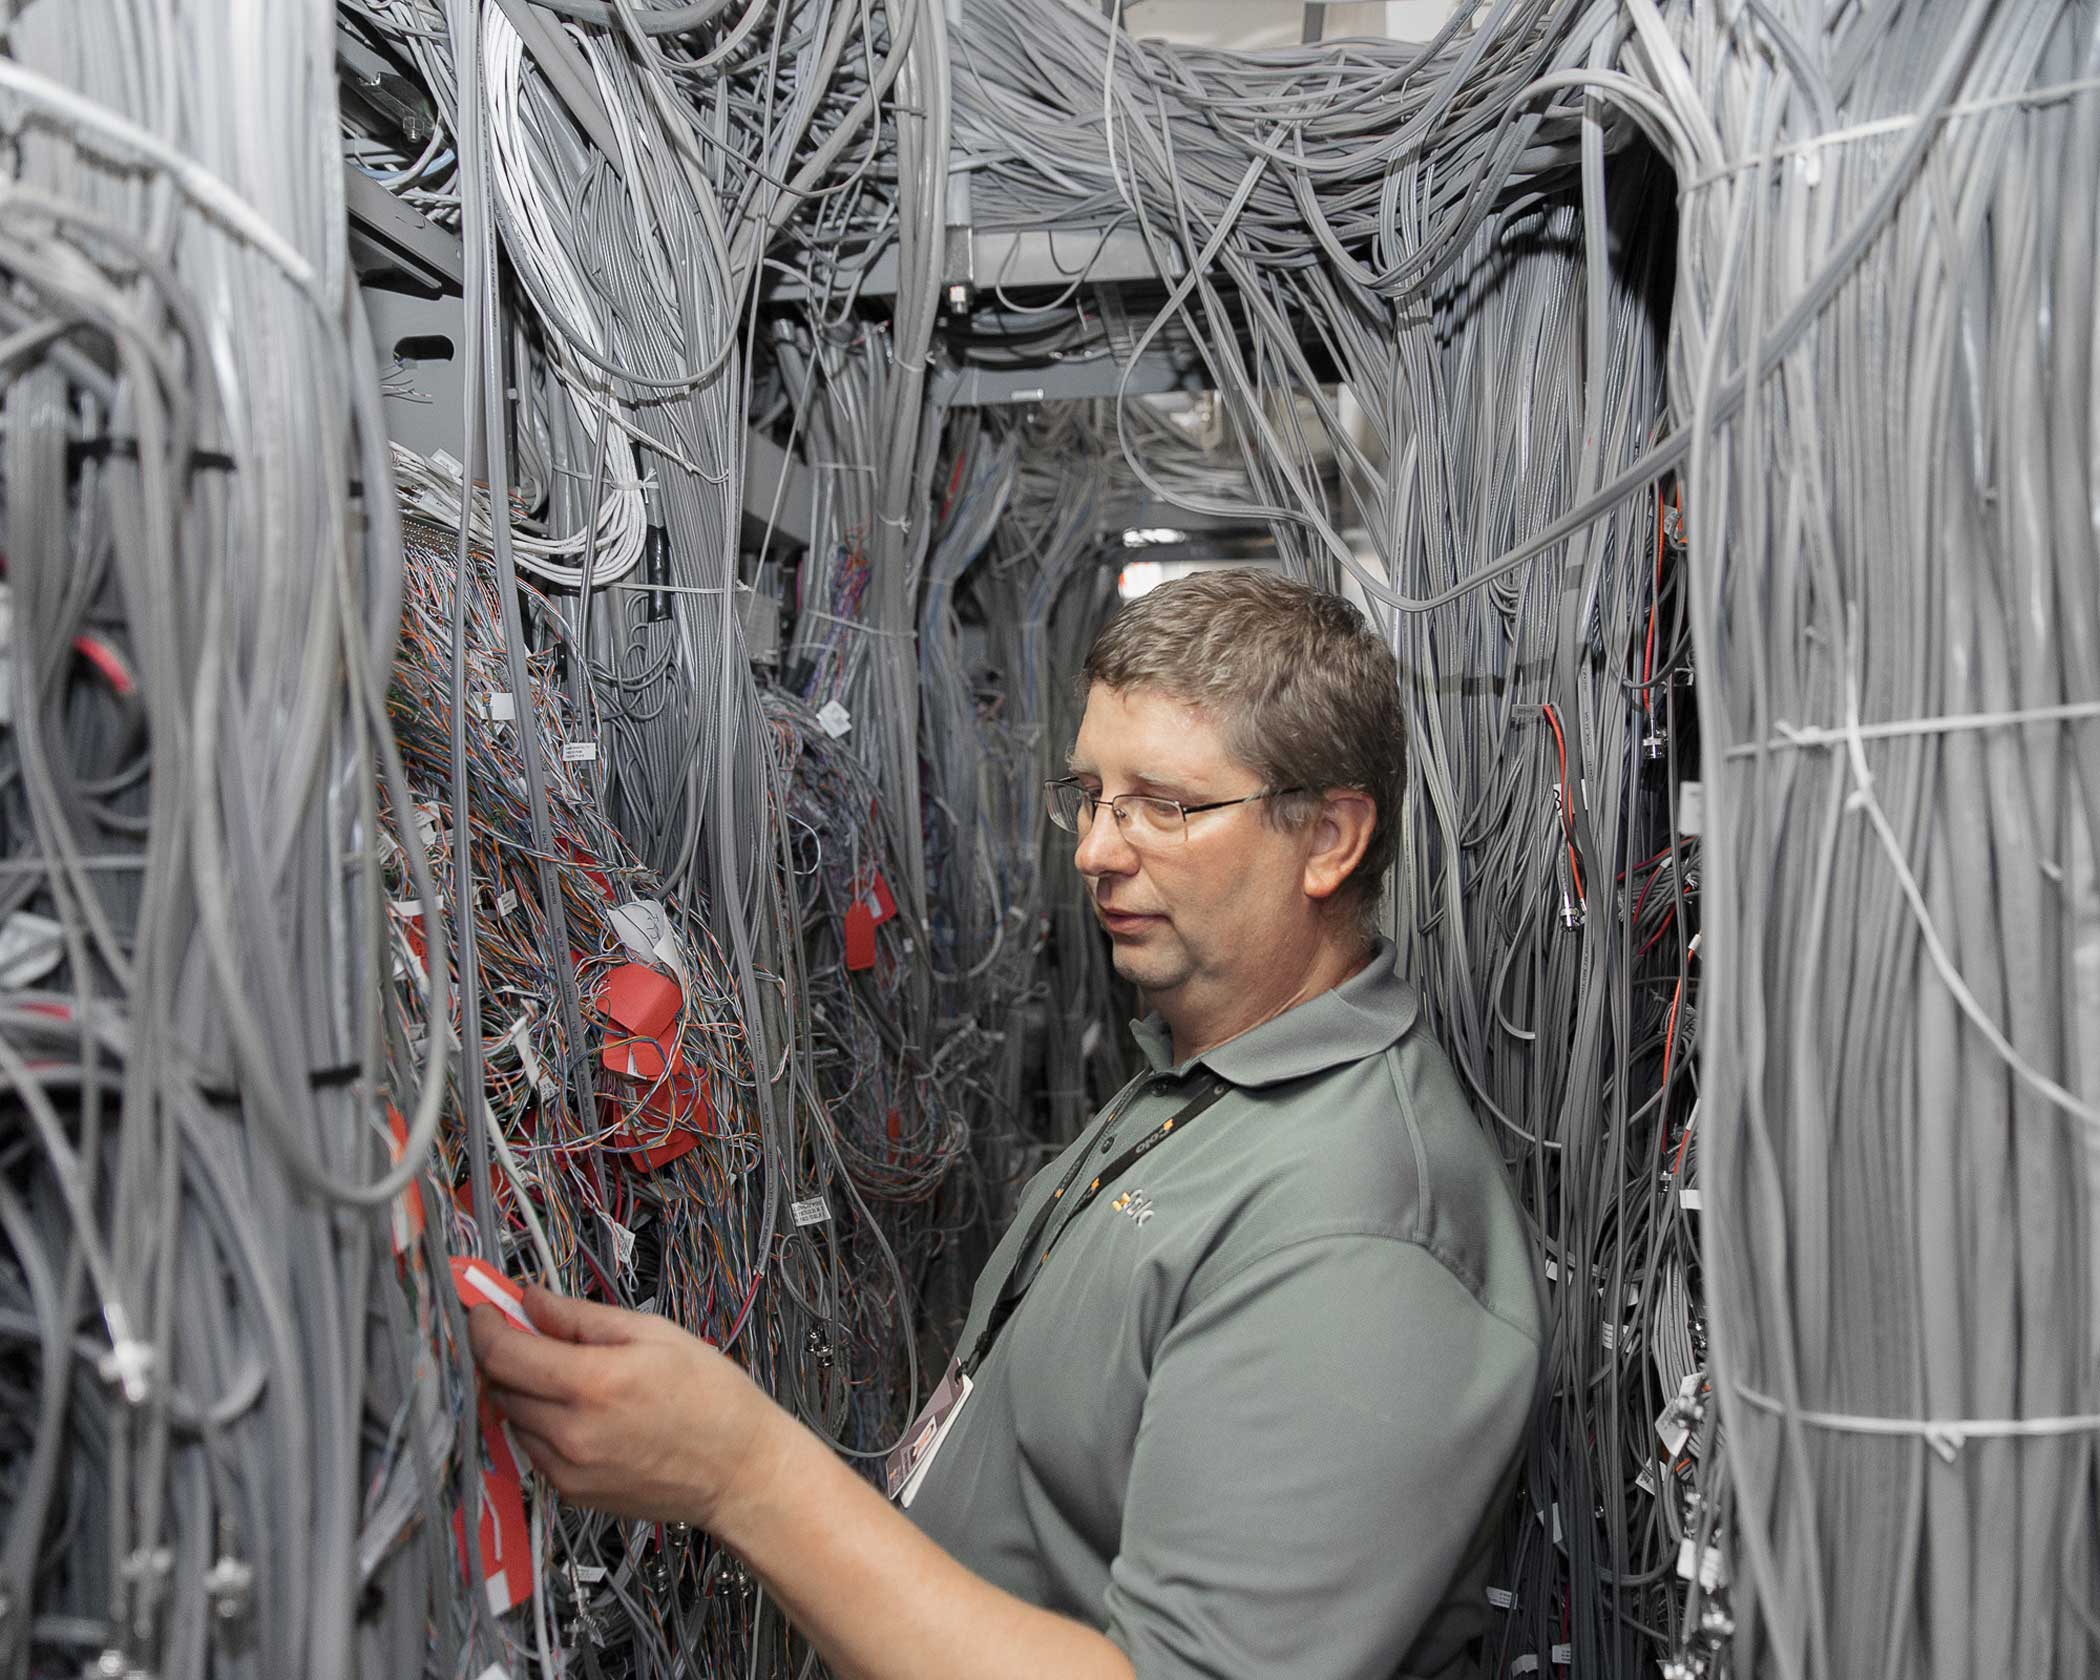 Copper cables form a dense mesh around a technician at 60 Hudson in a concentrated central hub aptly dubbed  The Nest.   Beneath the grey housing each cable is color coded and labeled to indicate its function.